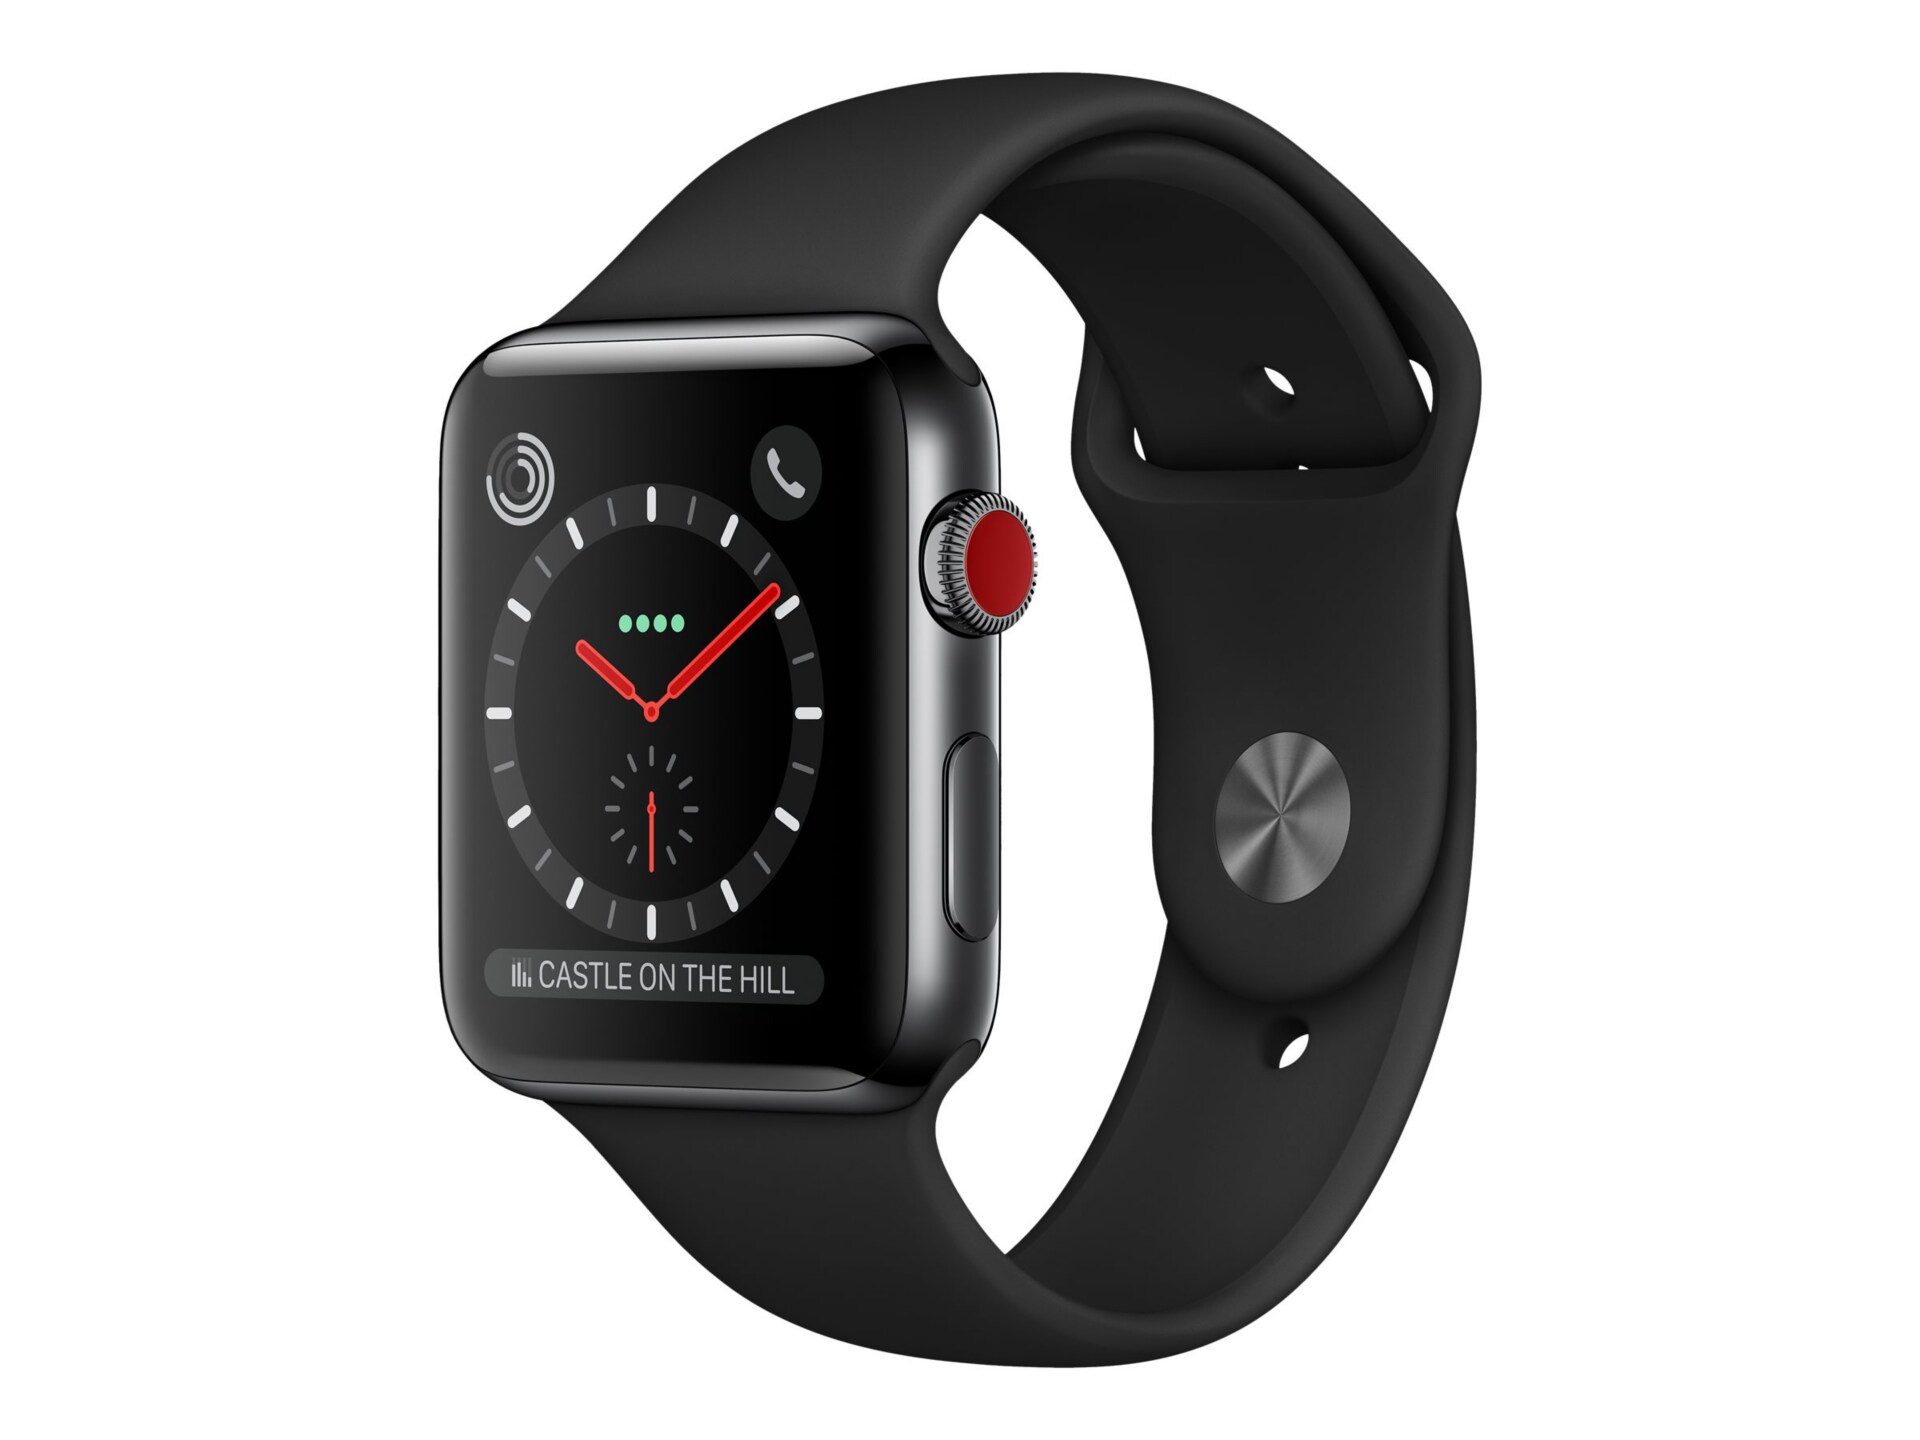 Apple Watch Series 3 (GPS + Cellular) - space gray aluminum - smart watch with sport band - black - 16 GB - not